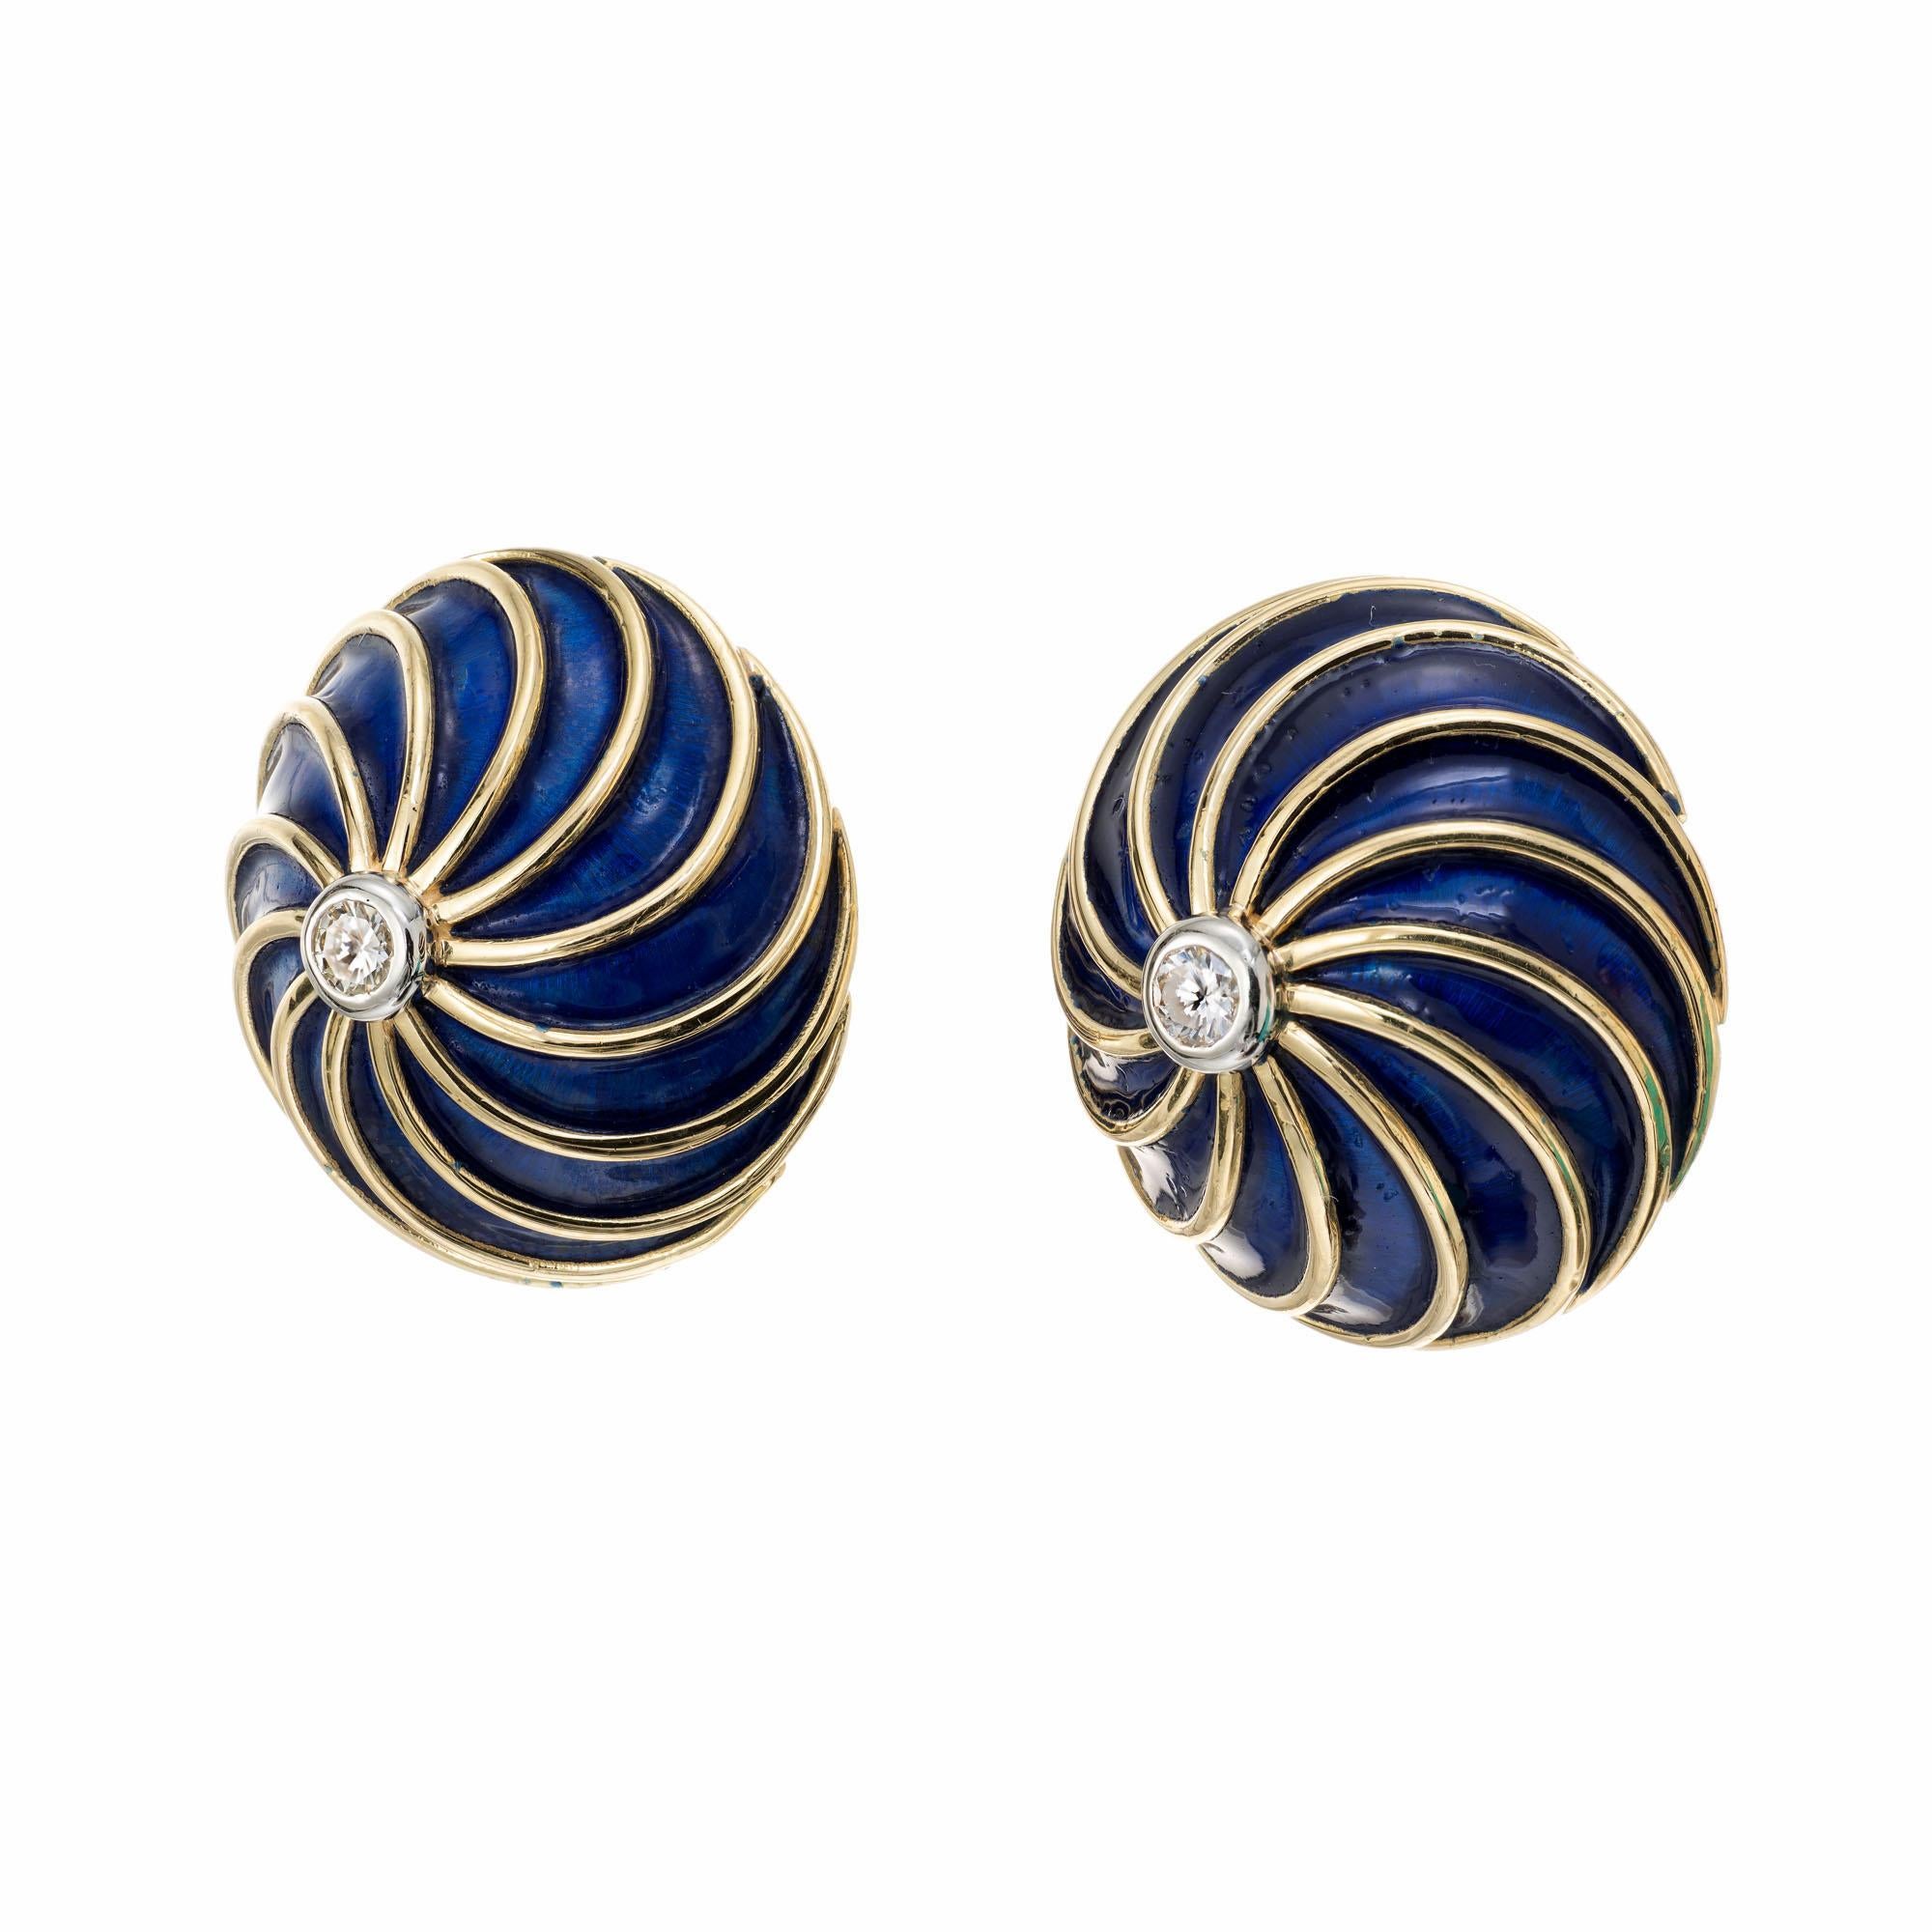 Round diamond and blue enamel swirl design earrings in 18k yellow gold.

2 round brilliant cut diamonds, H VS approx. .12cts.
18k yellow gold 
Stamped: 18k
9.1 grams
Top to bottom: 18.4mm or .75 Inch
Width: 18.4mm or .75 Inch
Depth or thickness: